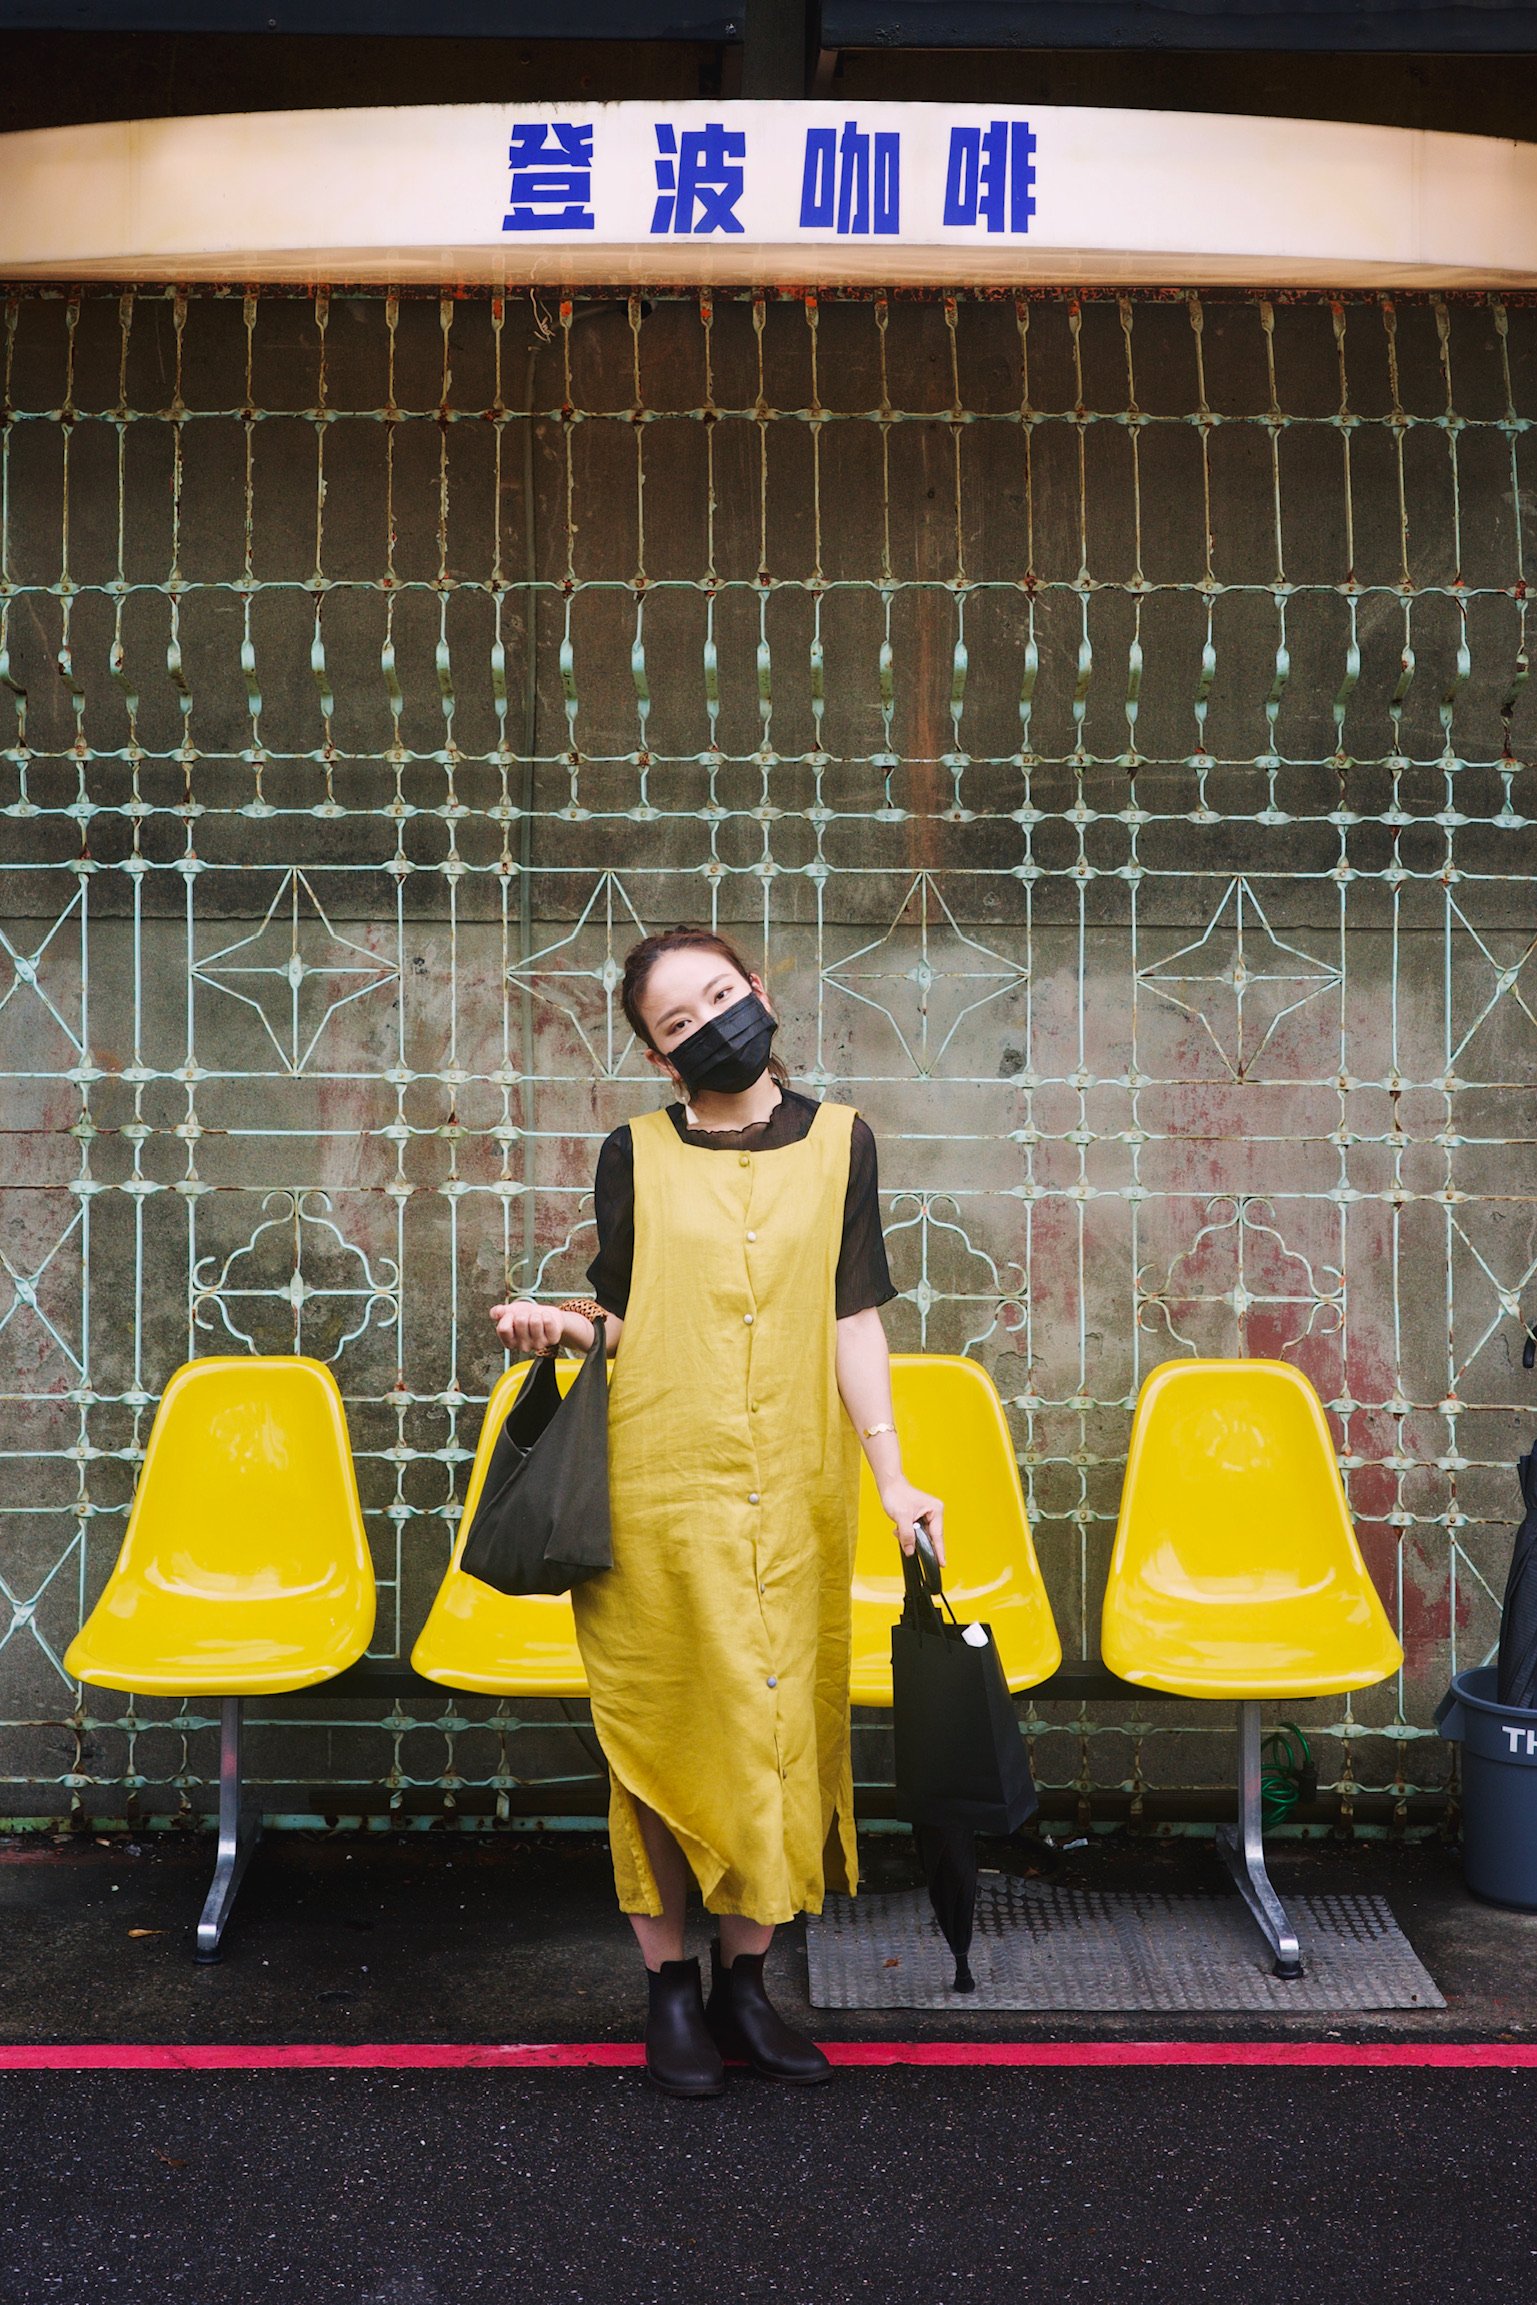 Woman wearing a yellow dress standing in front of a row of bright yellow chairs.